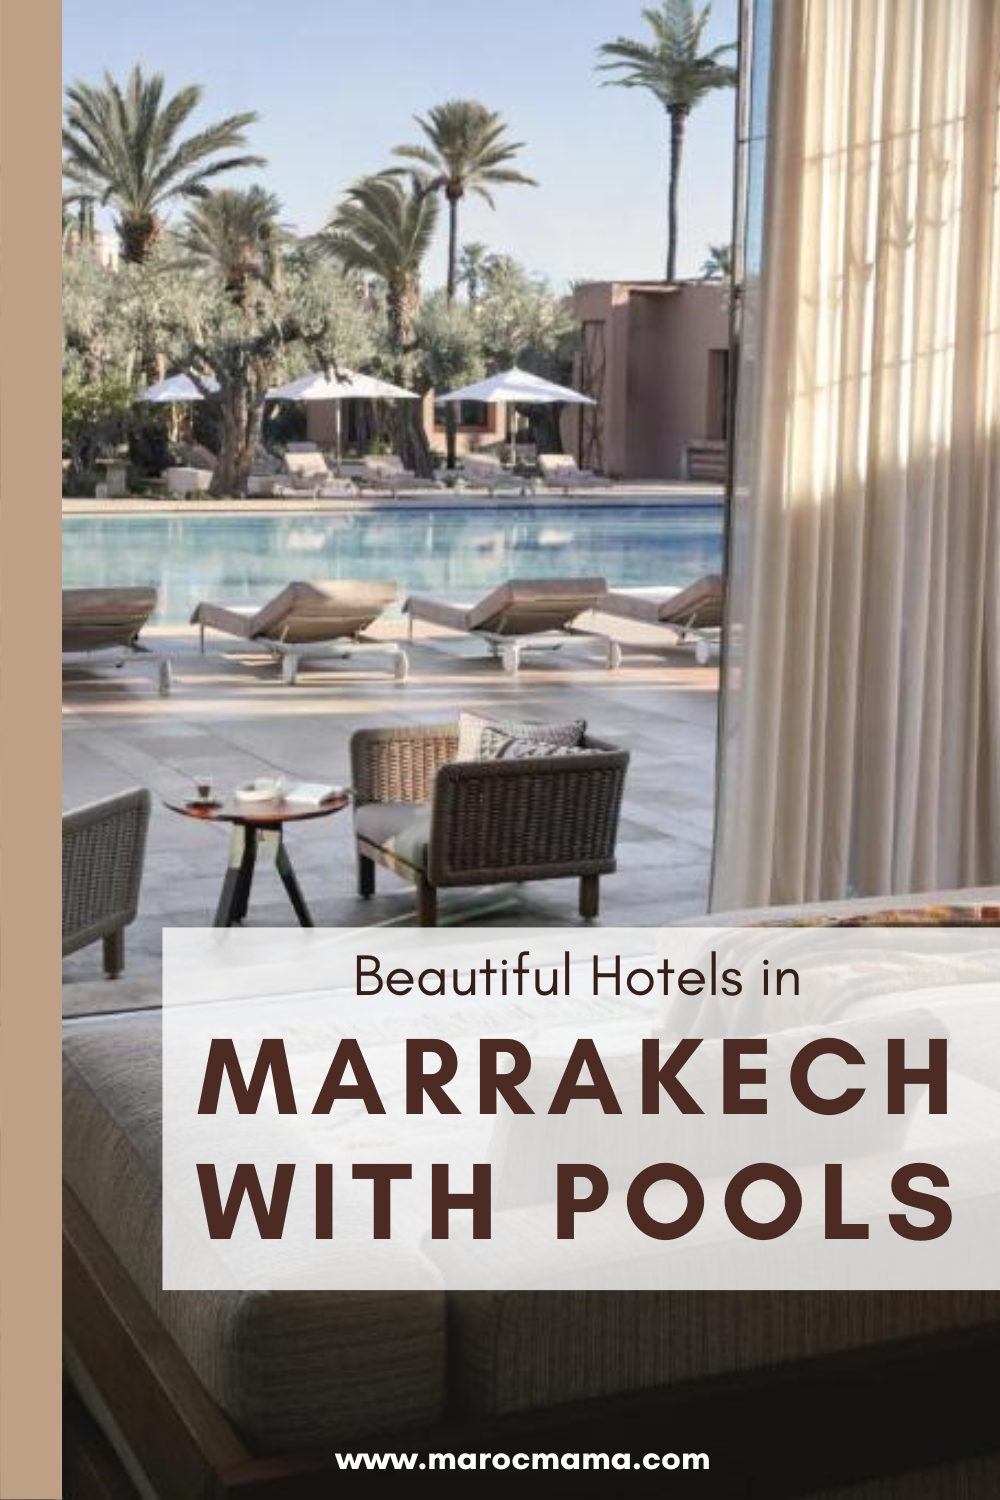 one of the beautfiful hotel in Marrakech with pools